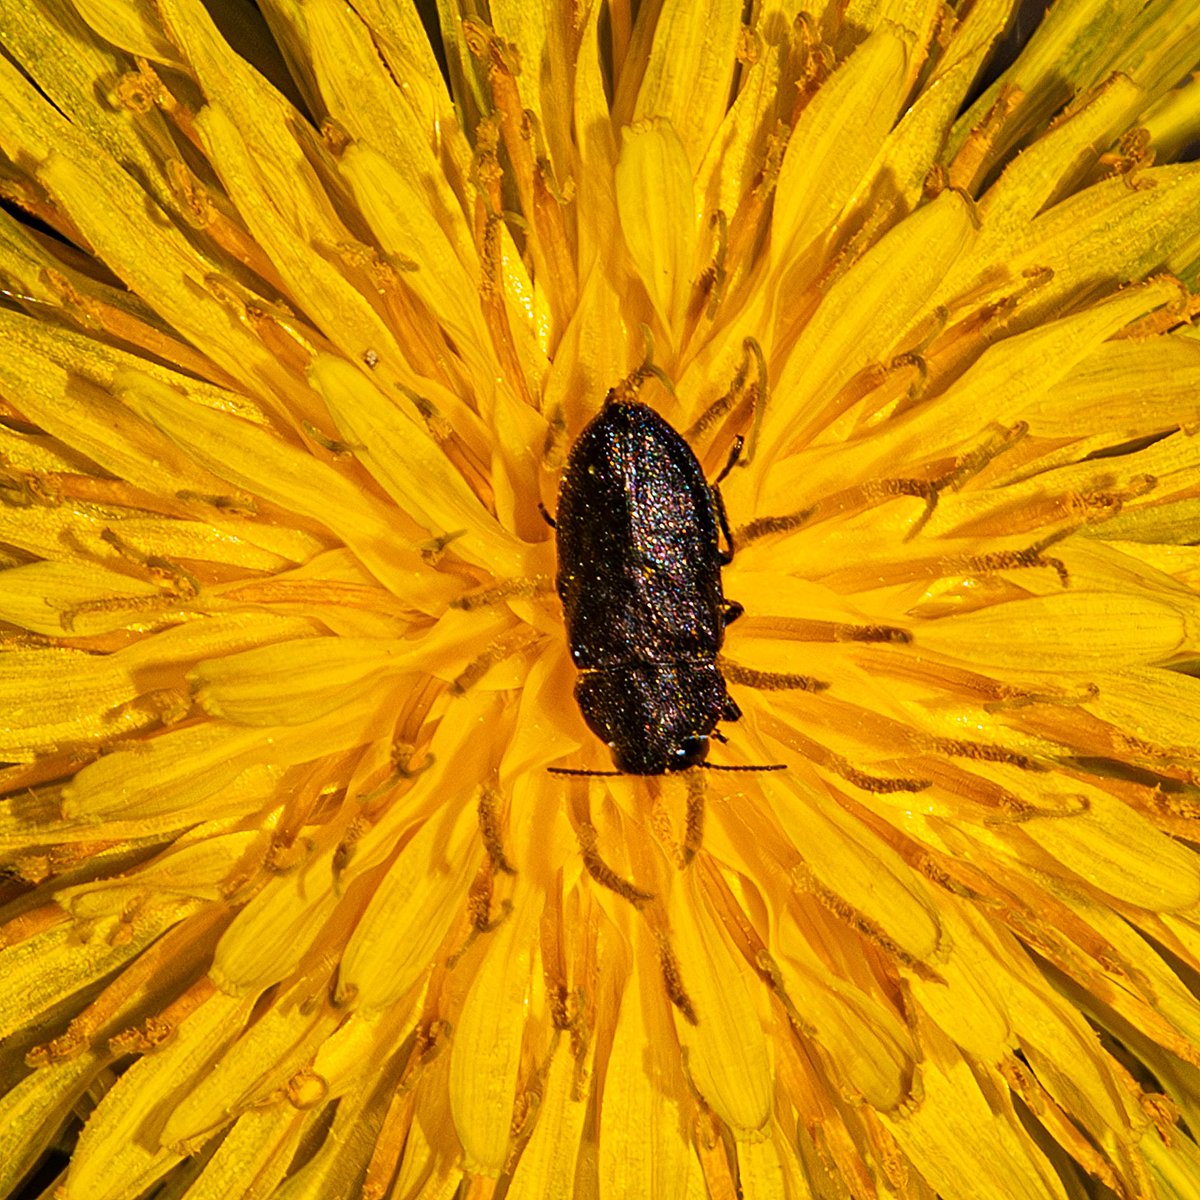 #XNatureCommunity #XNaturePhotography #TwitterNaturePhotography #NaturePhotography #NatureBeauty #insects #macrophotography #macro 
This tiny bug enjoying a bath in the dandelion is for you and for #MacroMonday